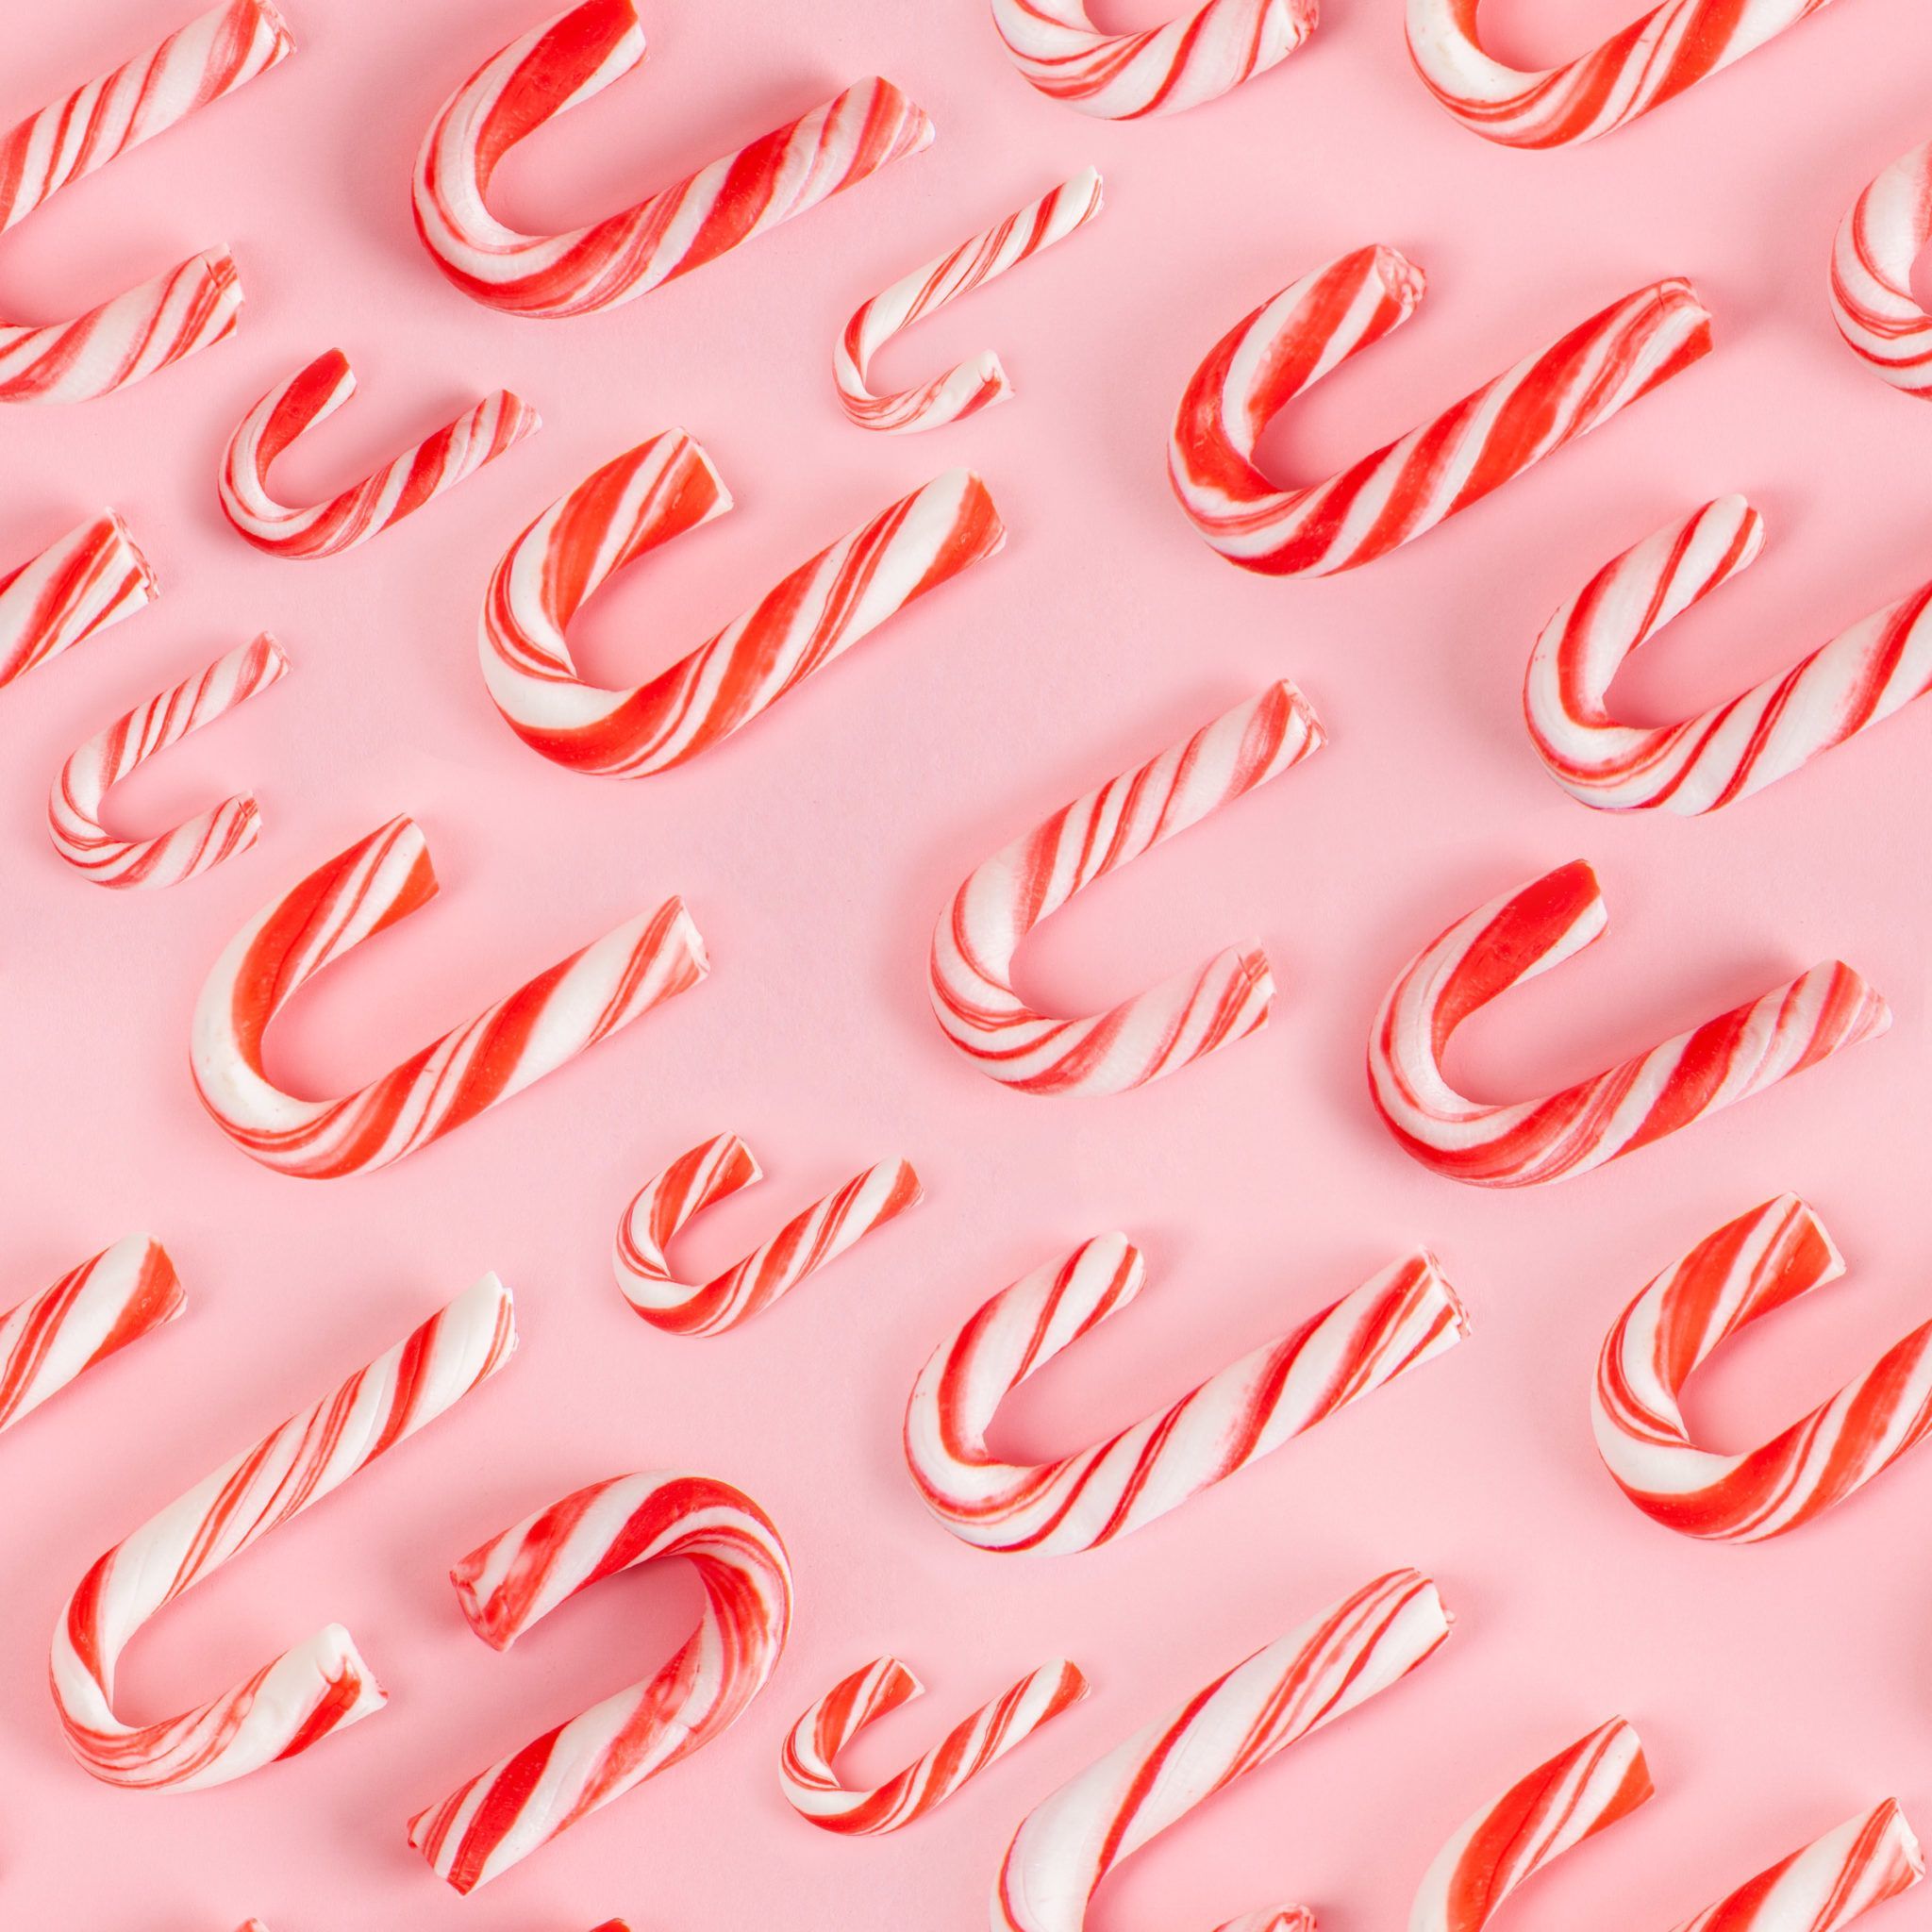 Seamless pattern of Christmas candy canes on pink background. Photo Pathway. Christmas candy cane, Christmas candy, Candy cane